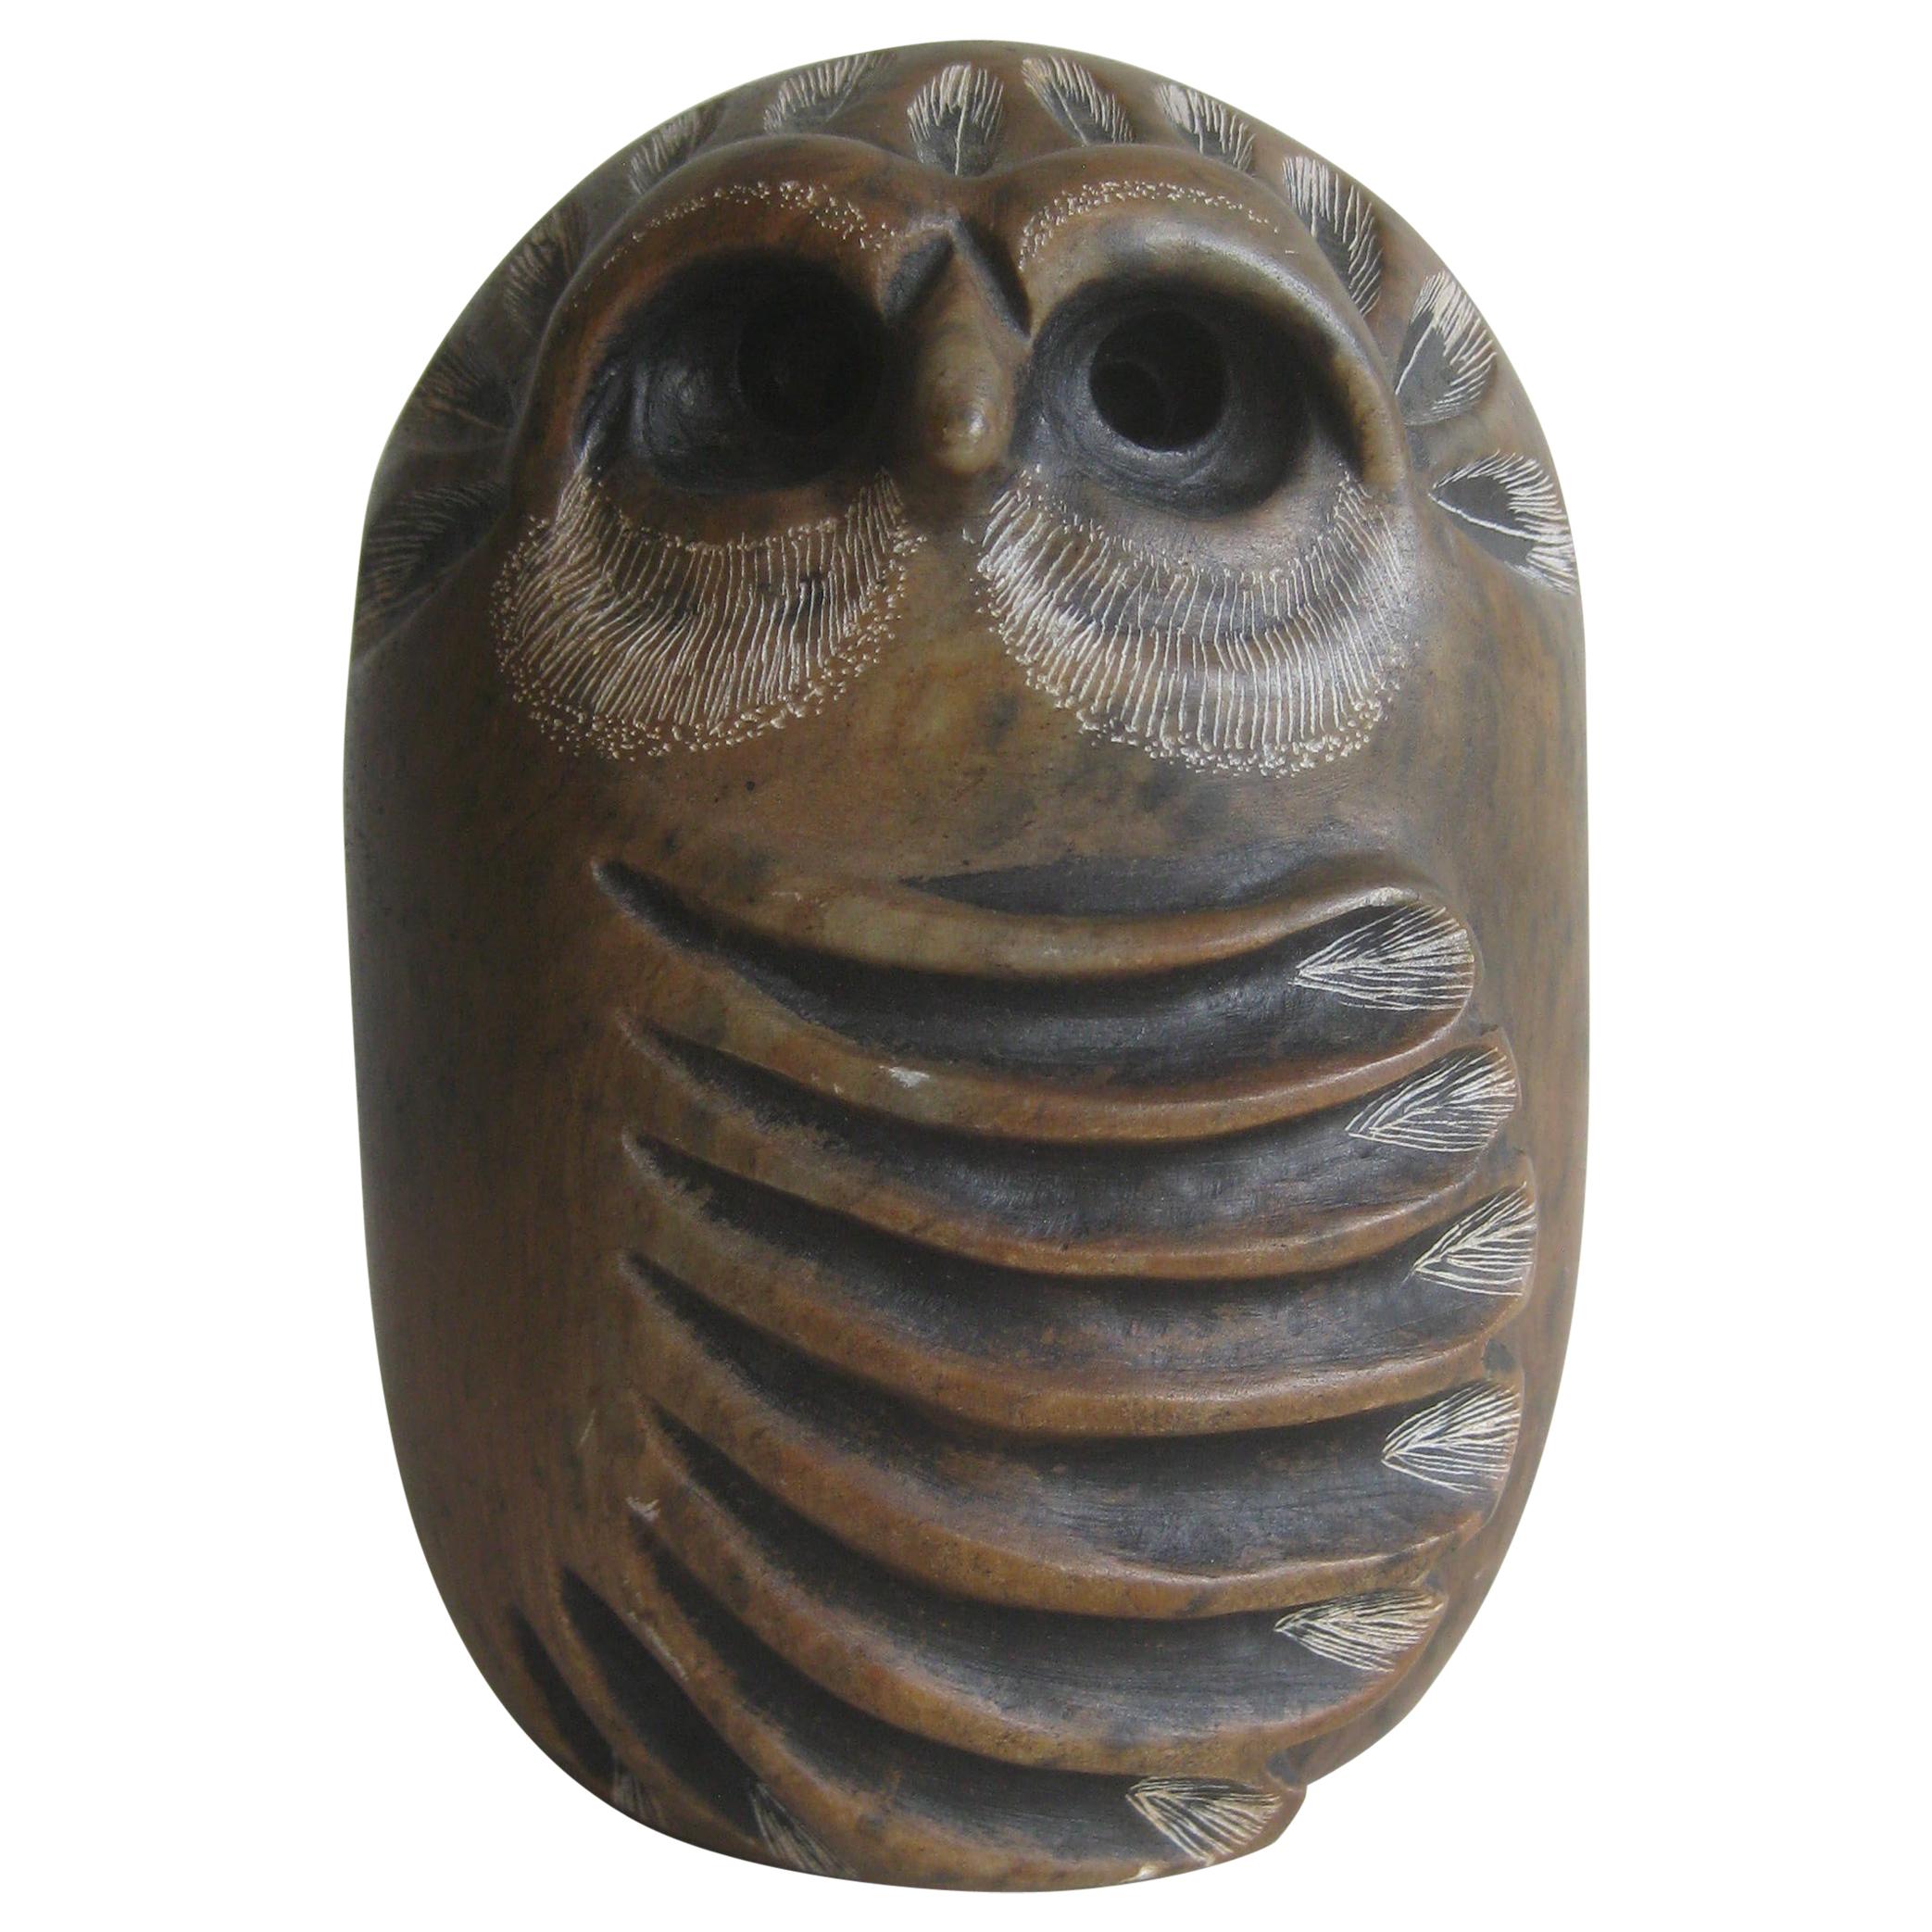 Glenn Heath Hand Carved Soapstone Owl Sculpture Figure Carving, Dated 1984